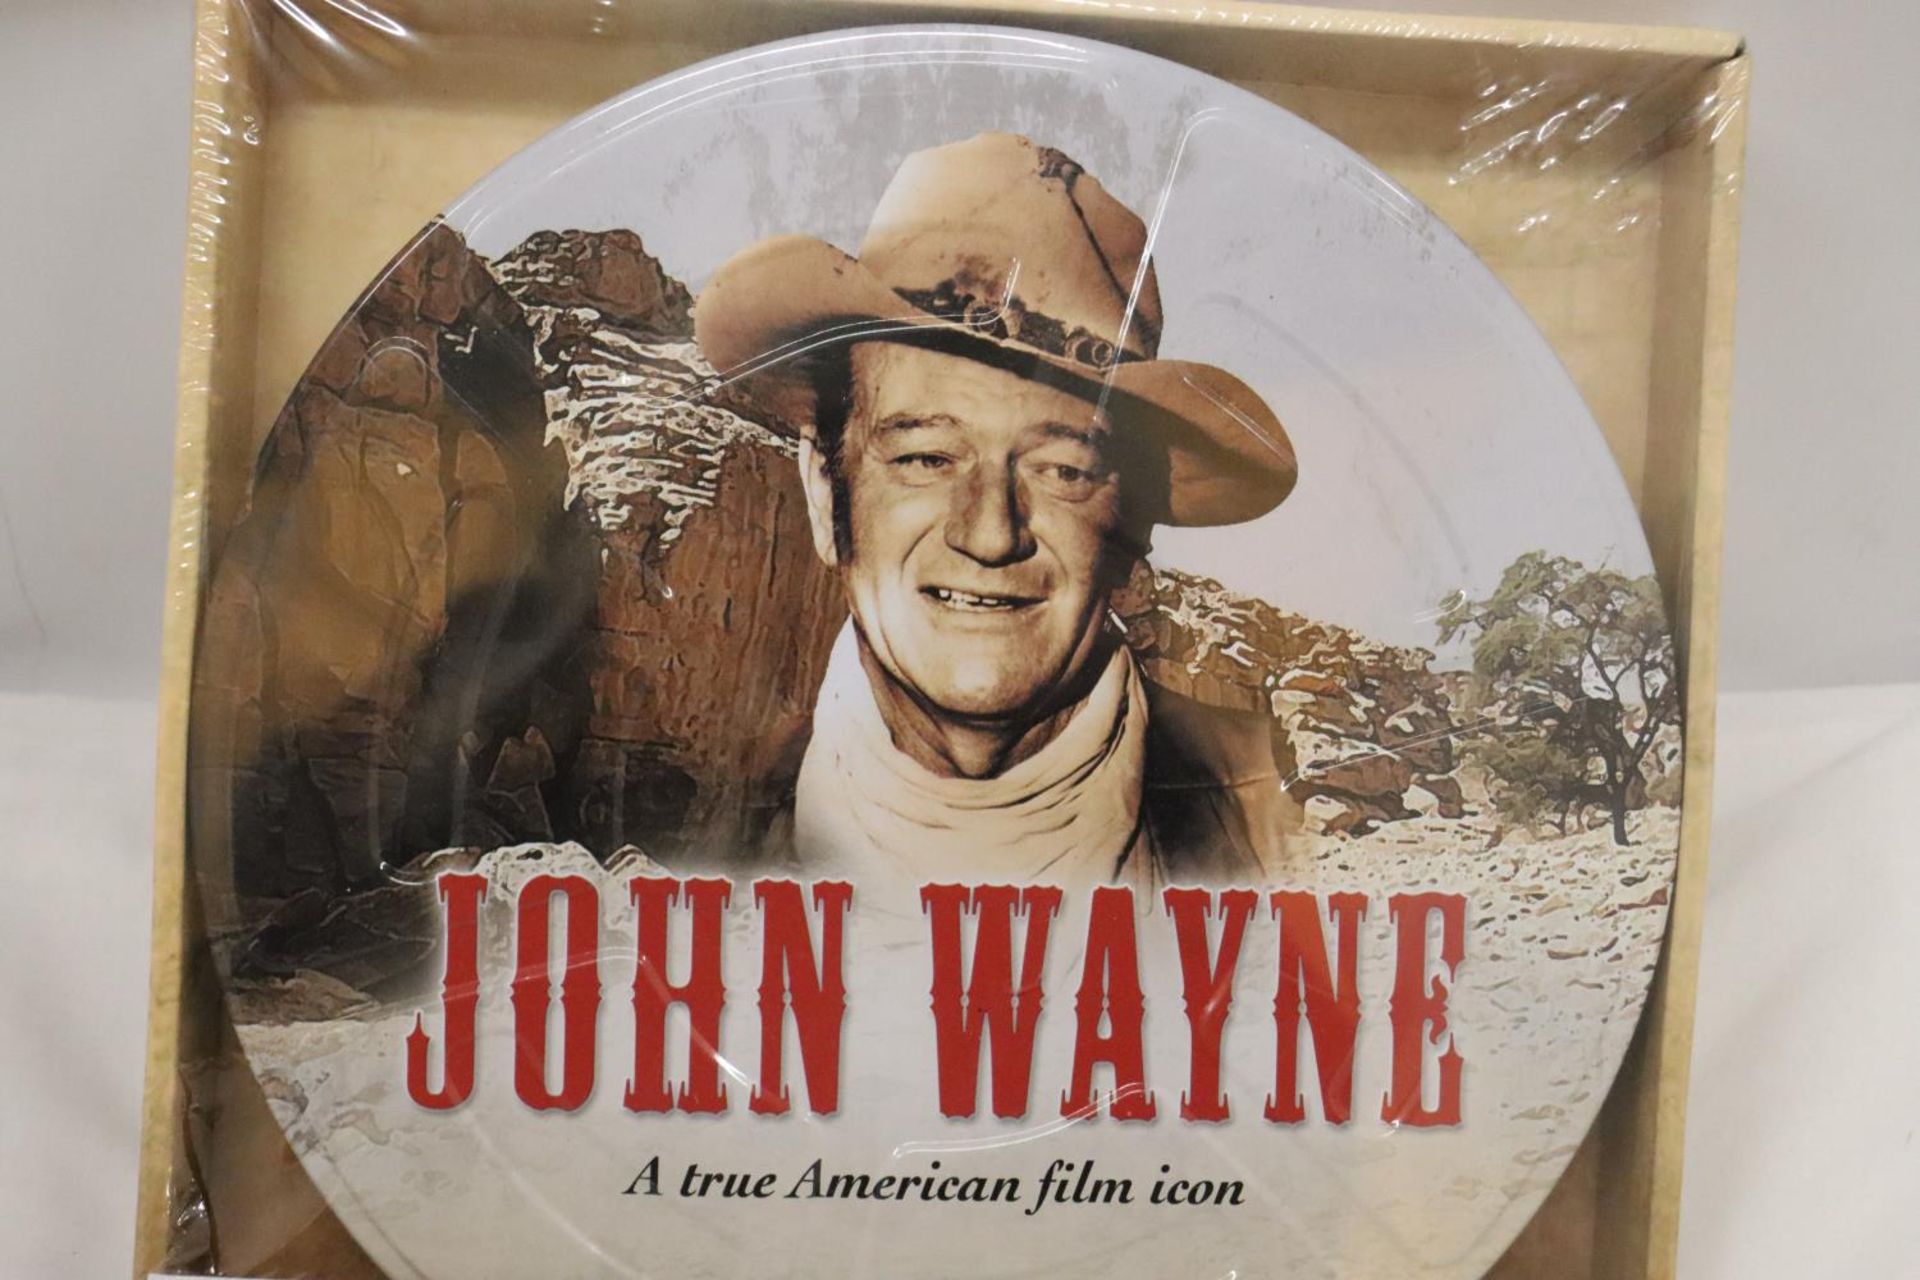 A NEW AND SEALED SET OF FIVE JOHN WAYNE DVD'S IN A METAL GIFT TIN